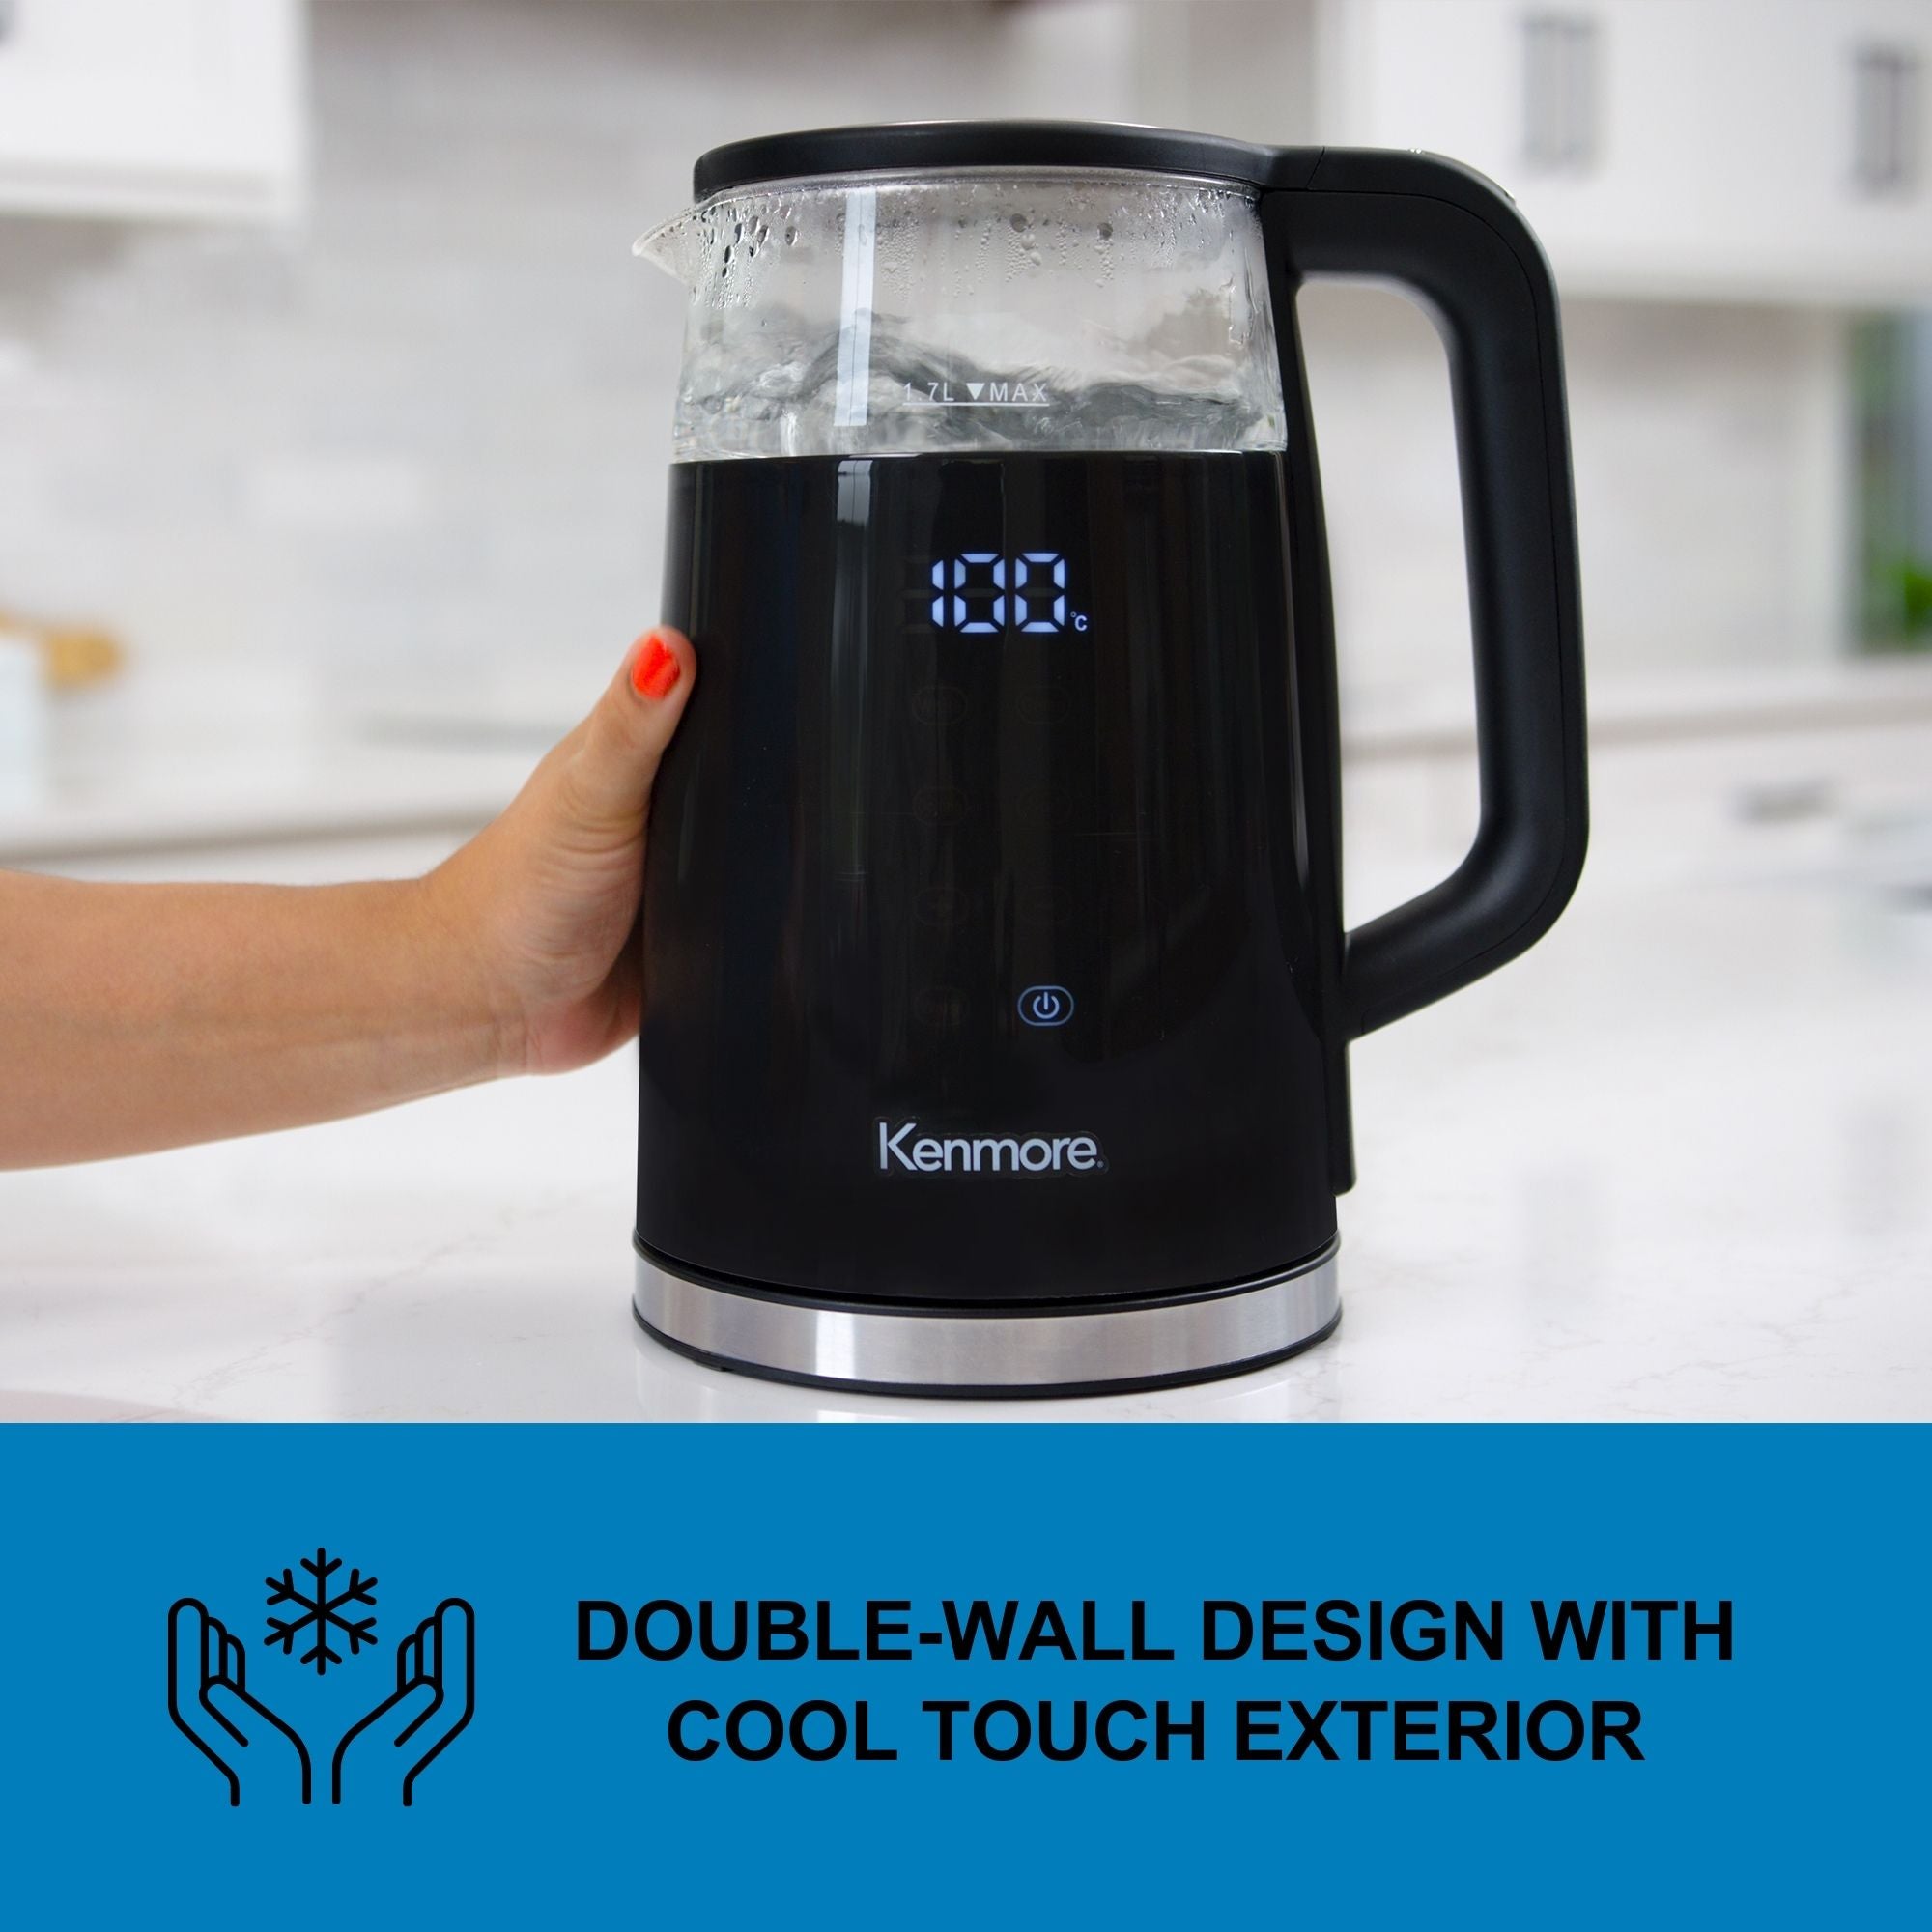 Kenmore 1.7L cordless kettle with adjustable temperature and 4 presets on a white counter with a person's hand touching the side. Text below reads, "Double wall cool-touch design"